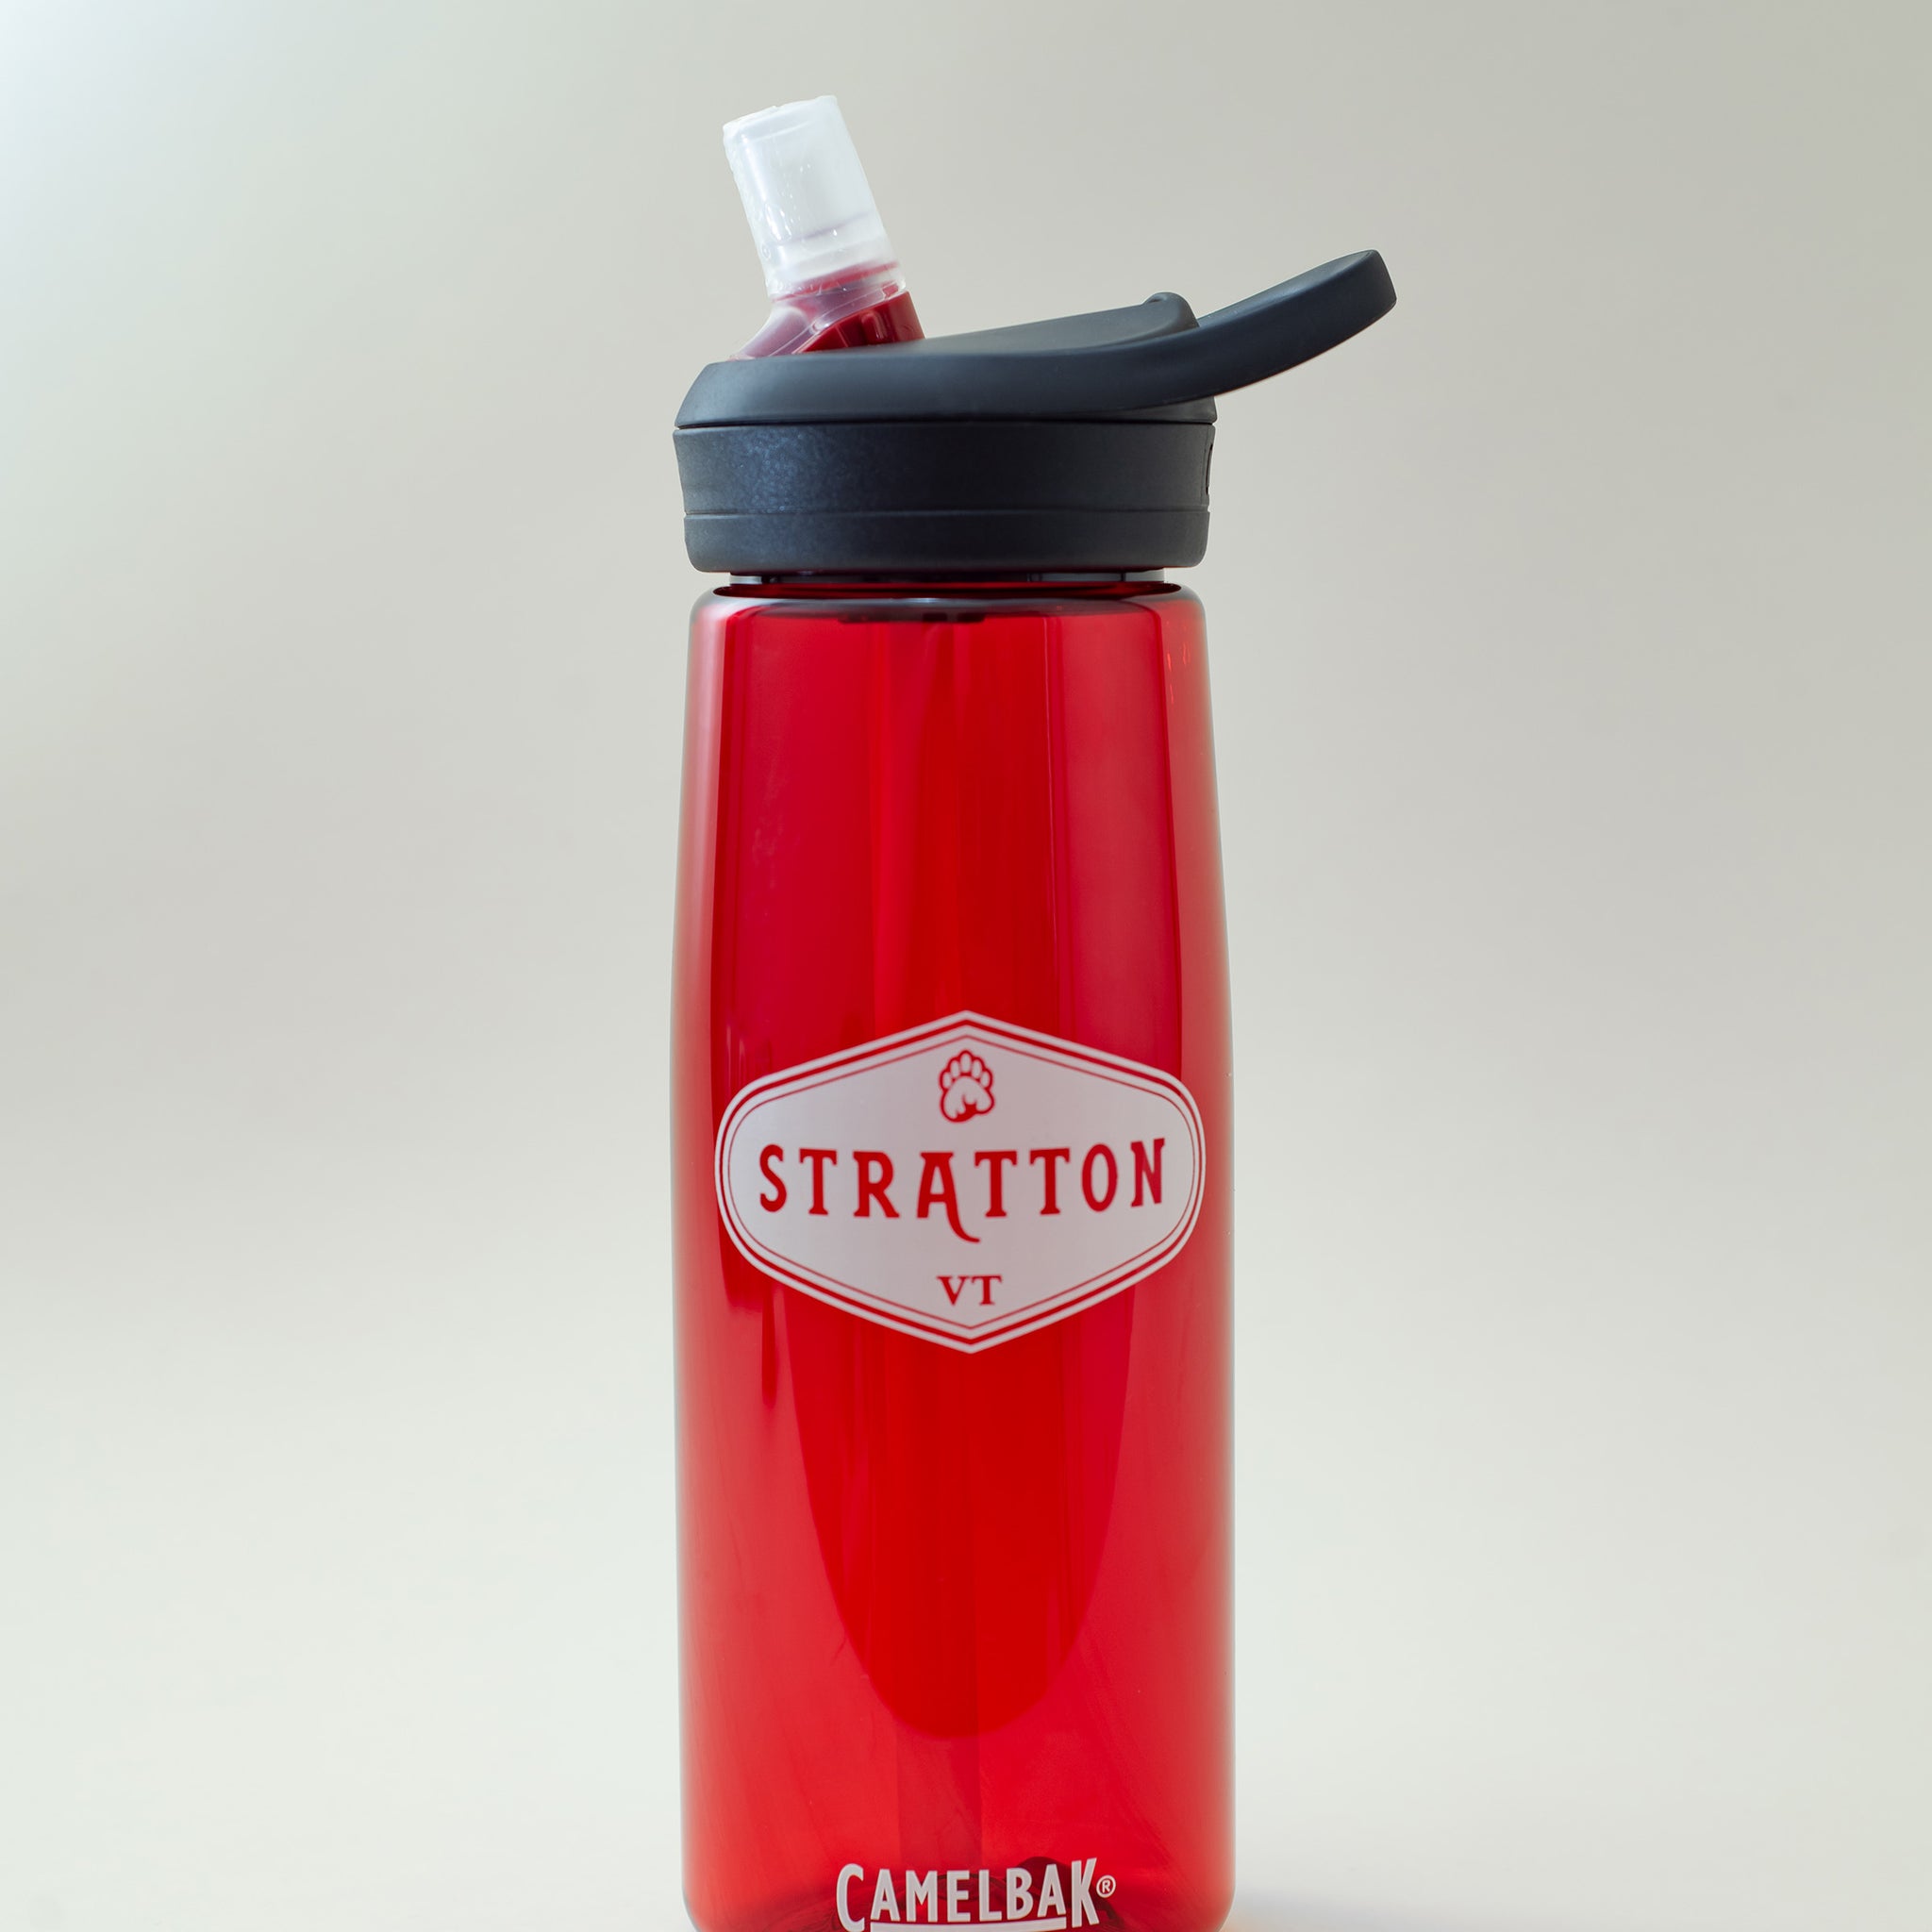 Stratton 32 oz Insulated Water Bottle by Camelbak